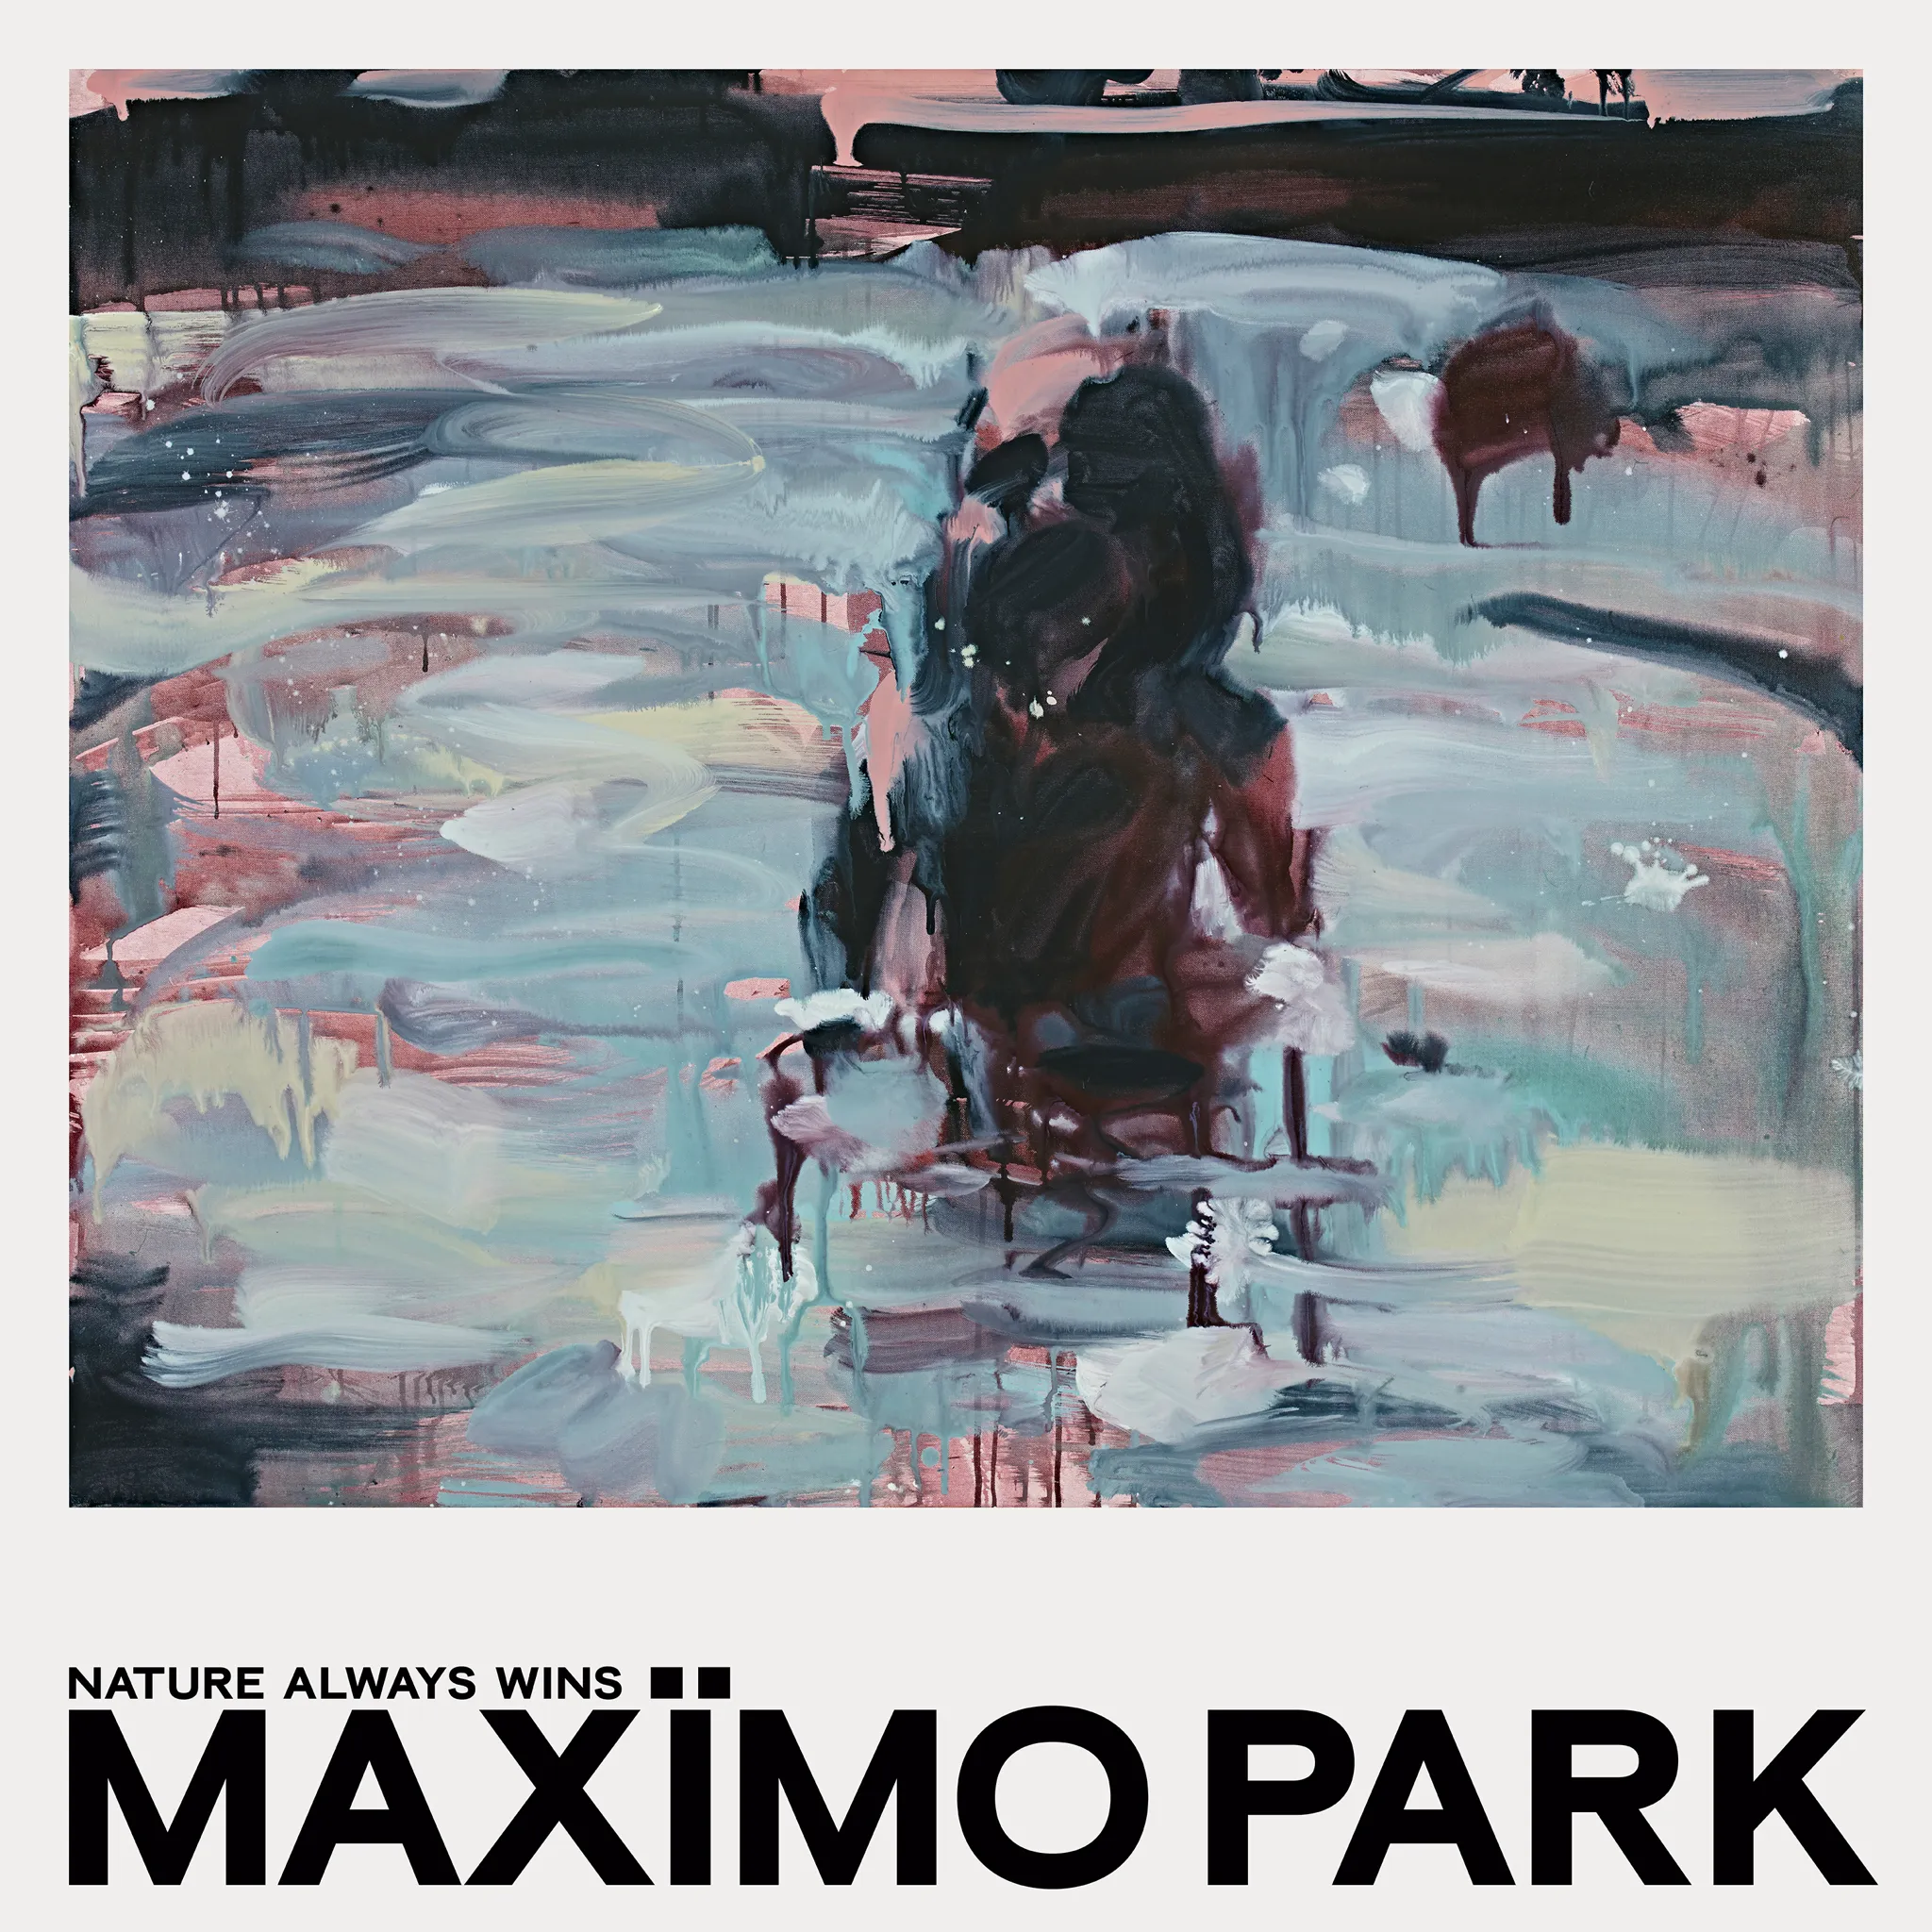 <strong>Maximo Park - Nature Always Wins</strong> (Vinyl LP - turquoise)